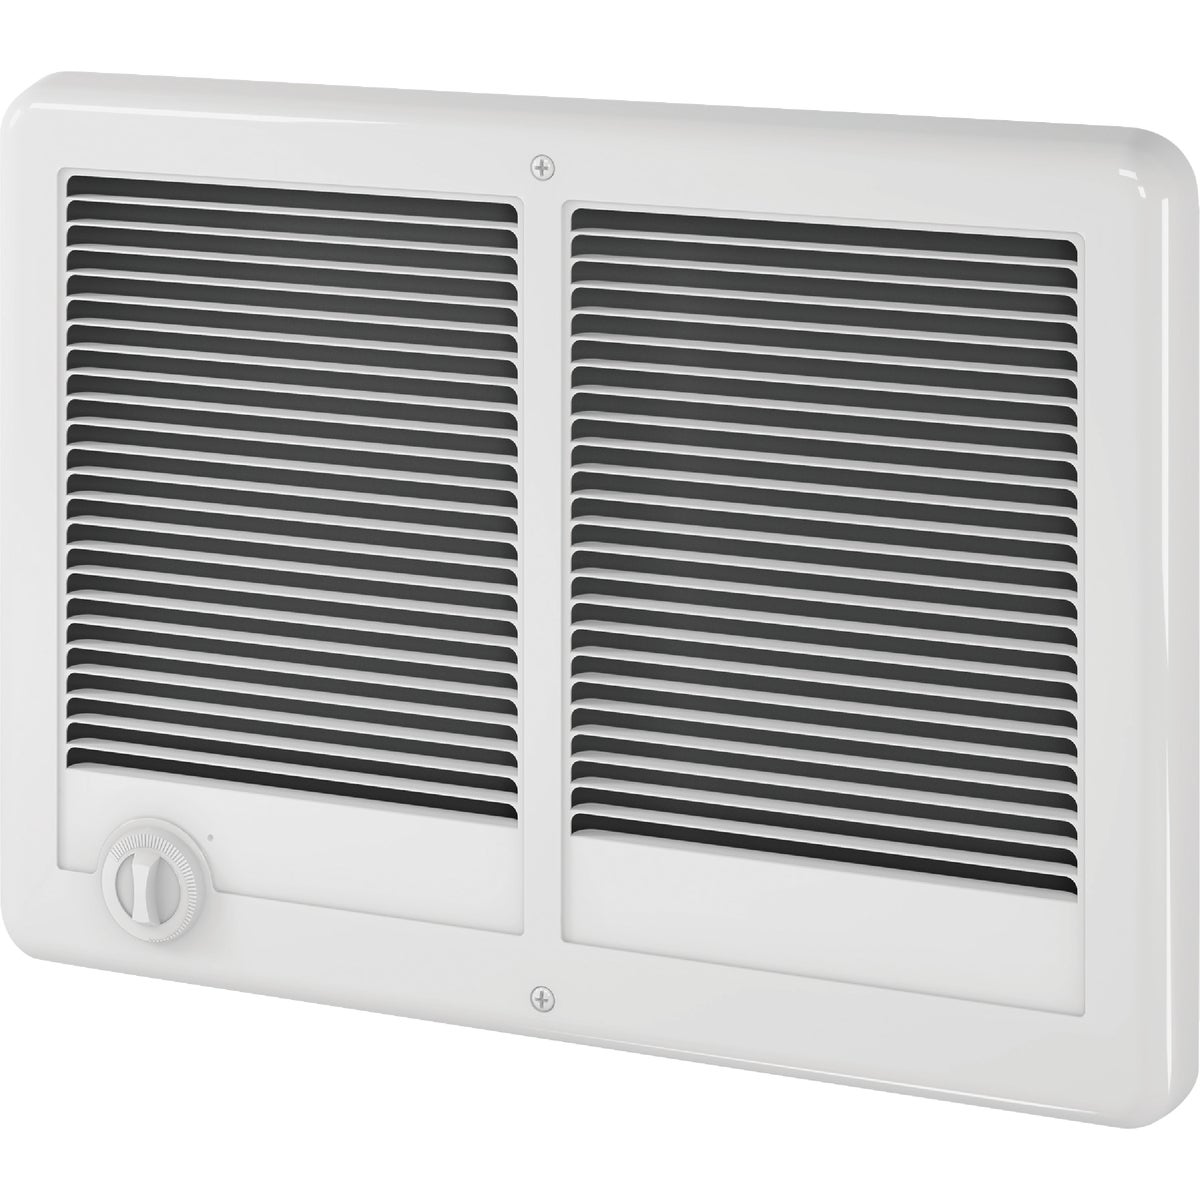 Item 458821, An ideal choice for heating larger rooms with just one heater--two heaters 